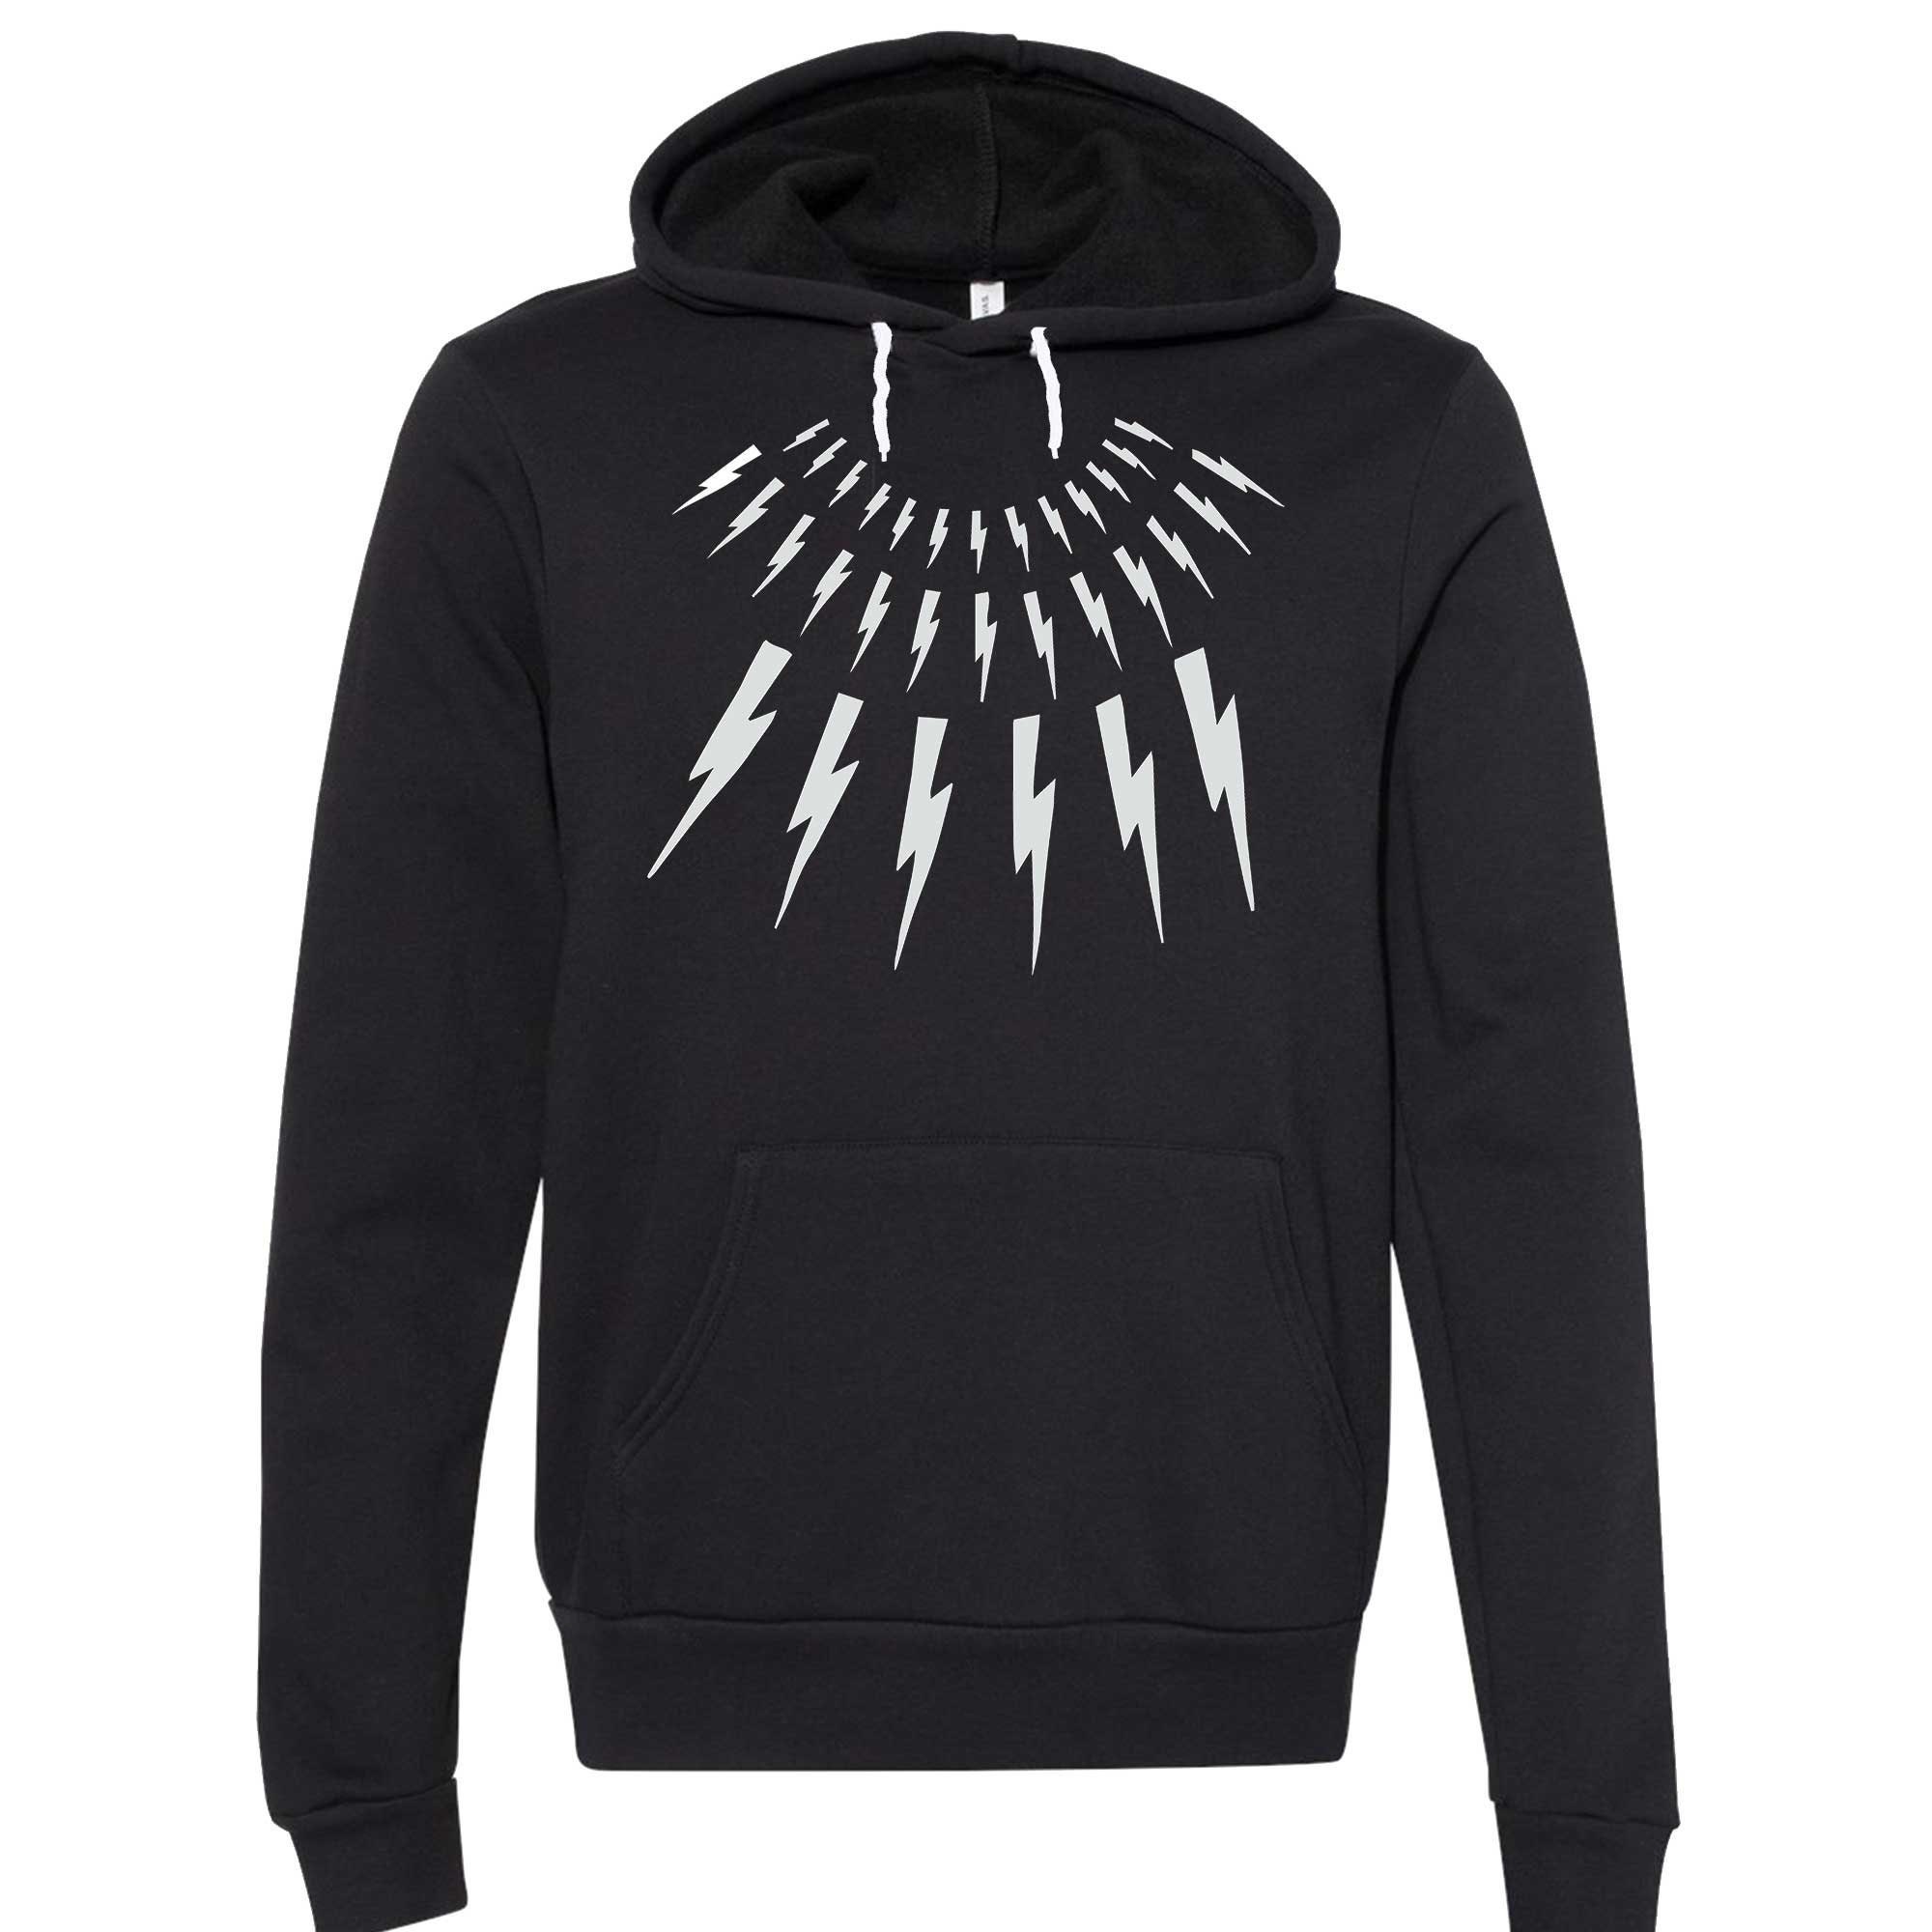 BONES AND BOLTS HOODIE (INFINITY) 60%OFF 